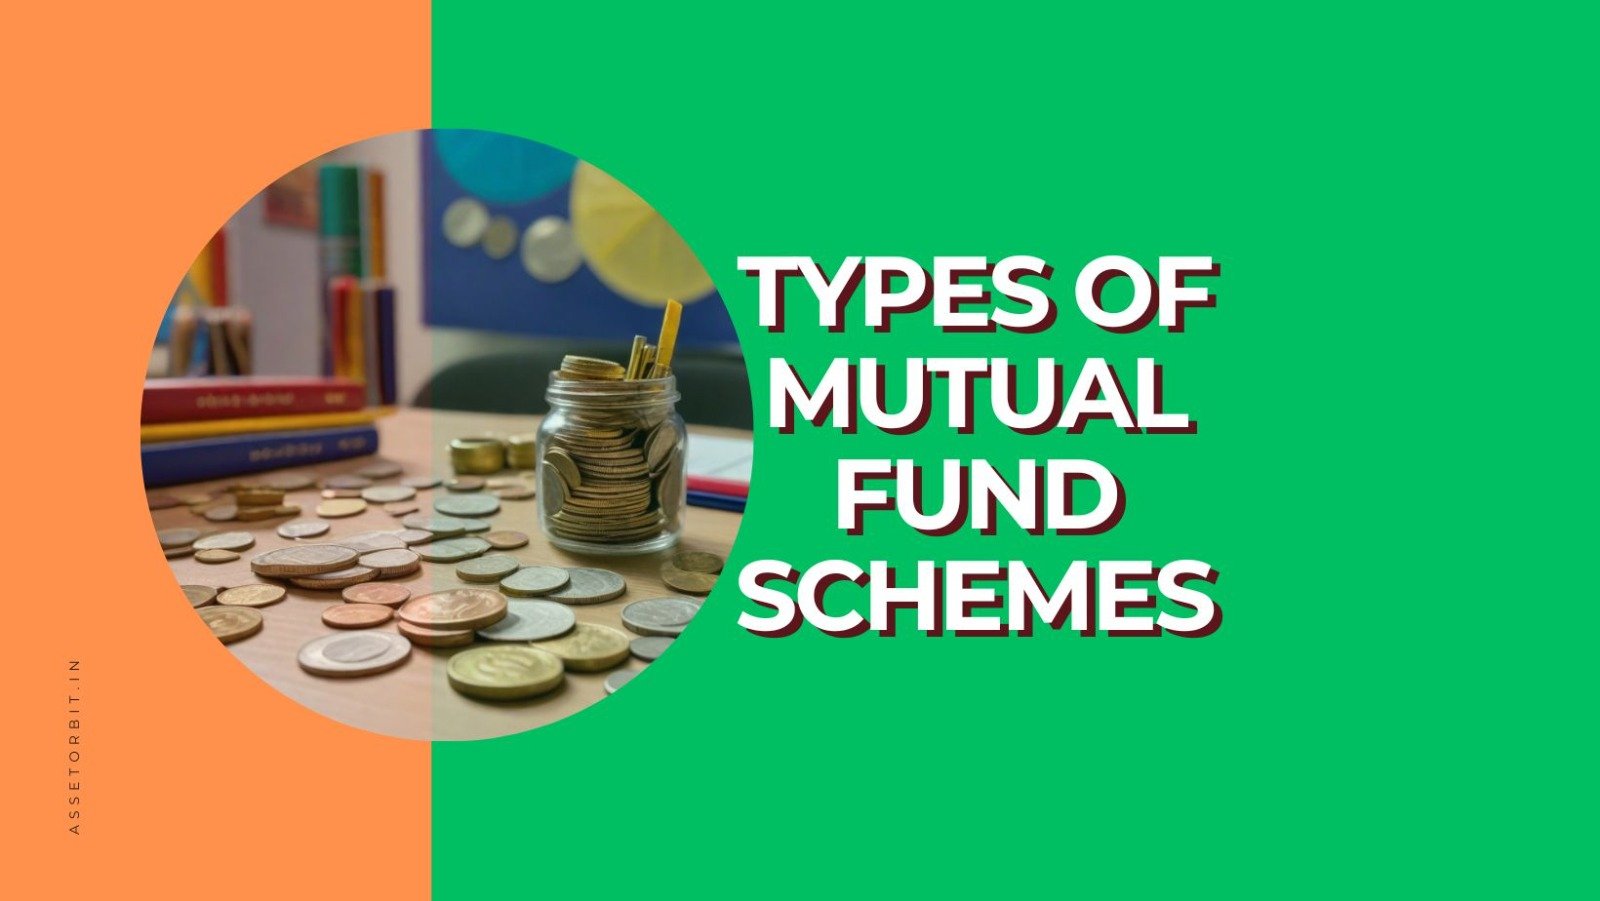 Types of Mutual Fund Schemes